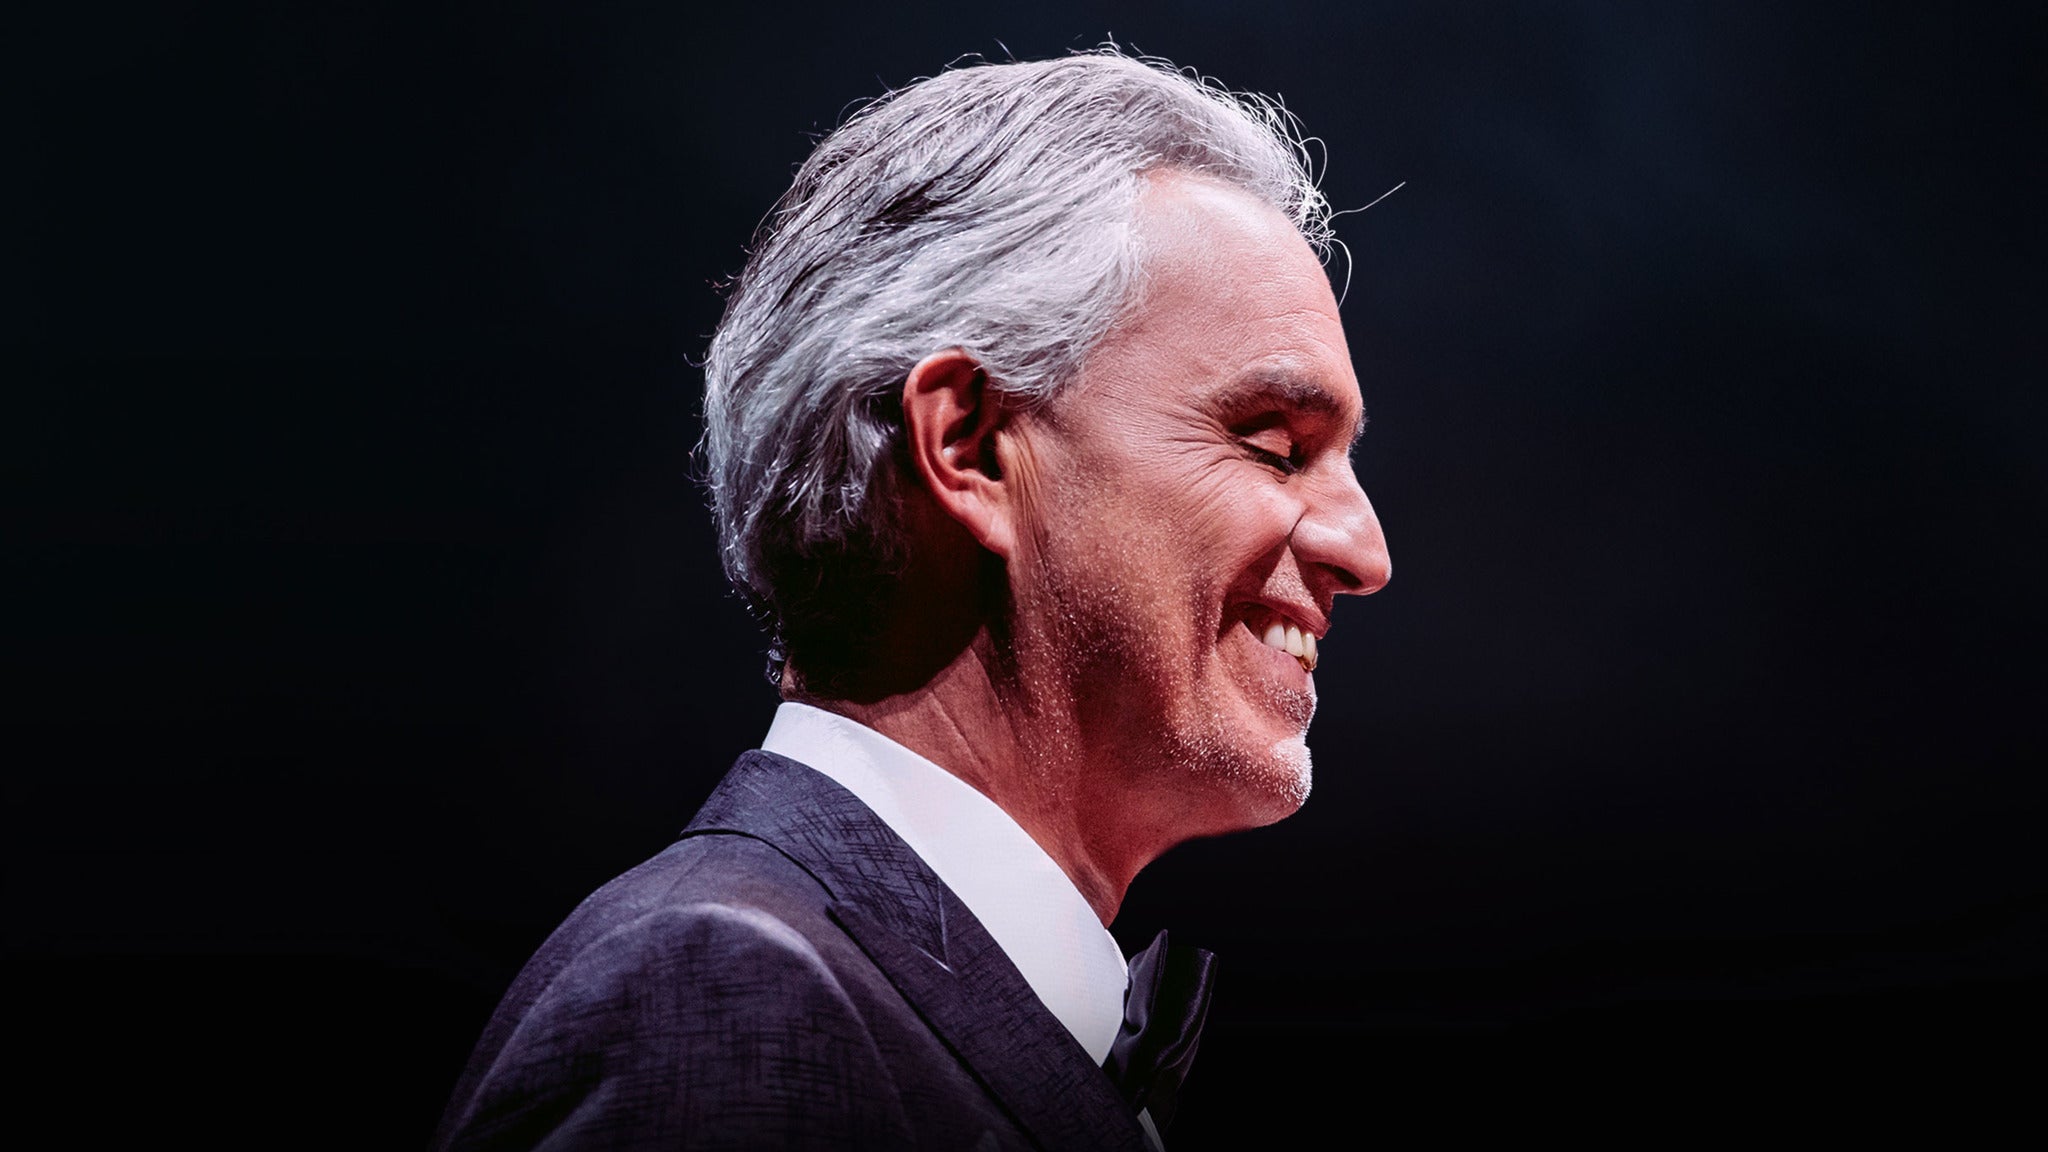 Andrea Bocelli at Chase Center